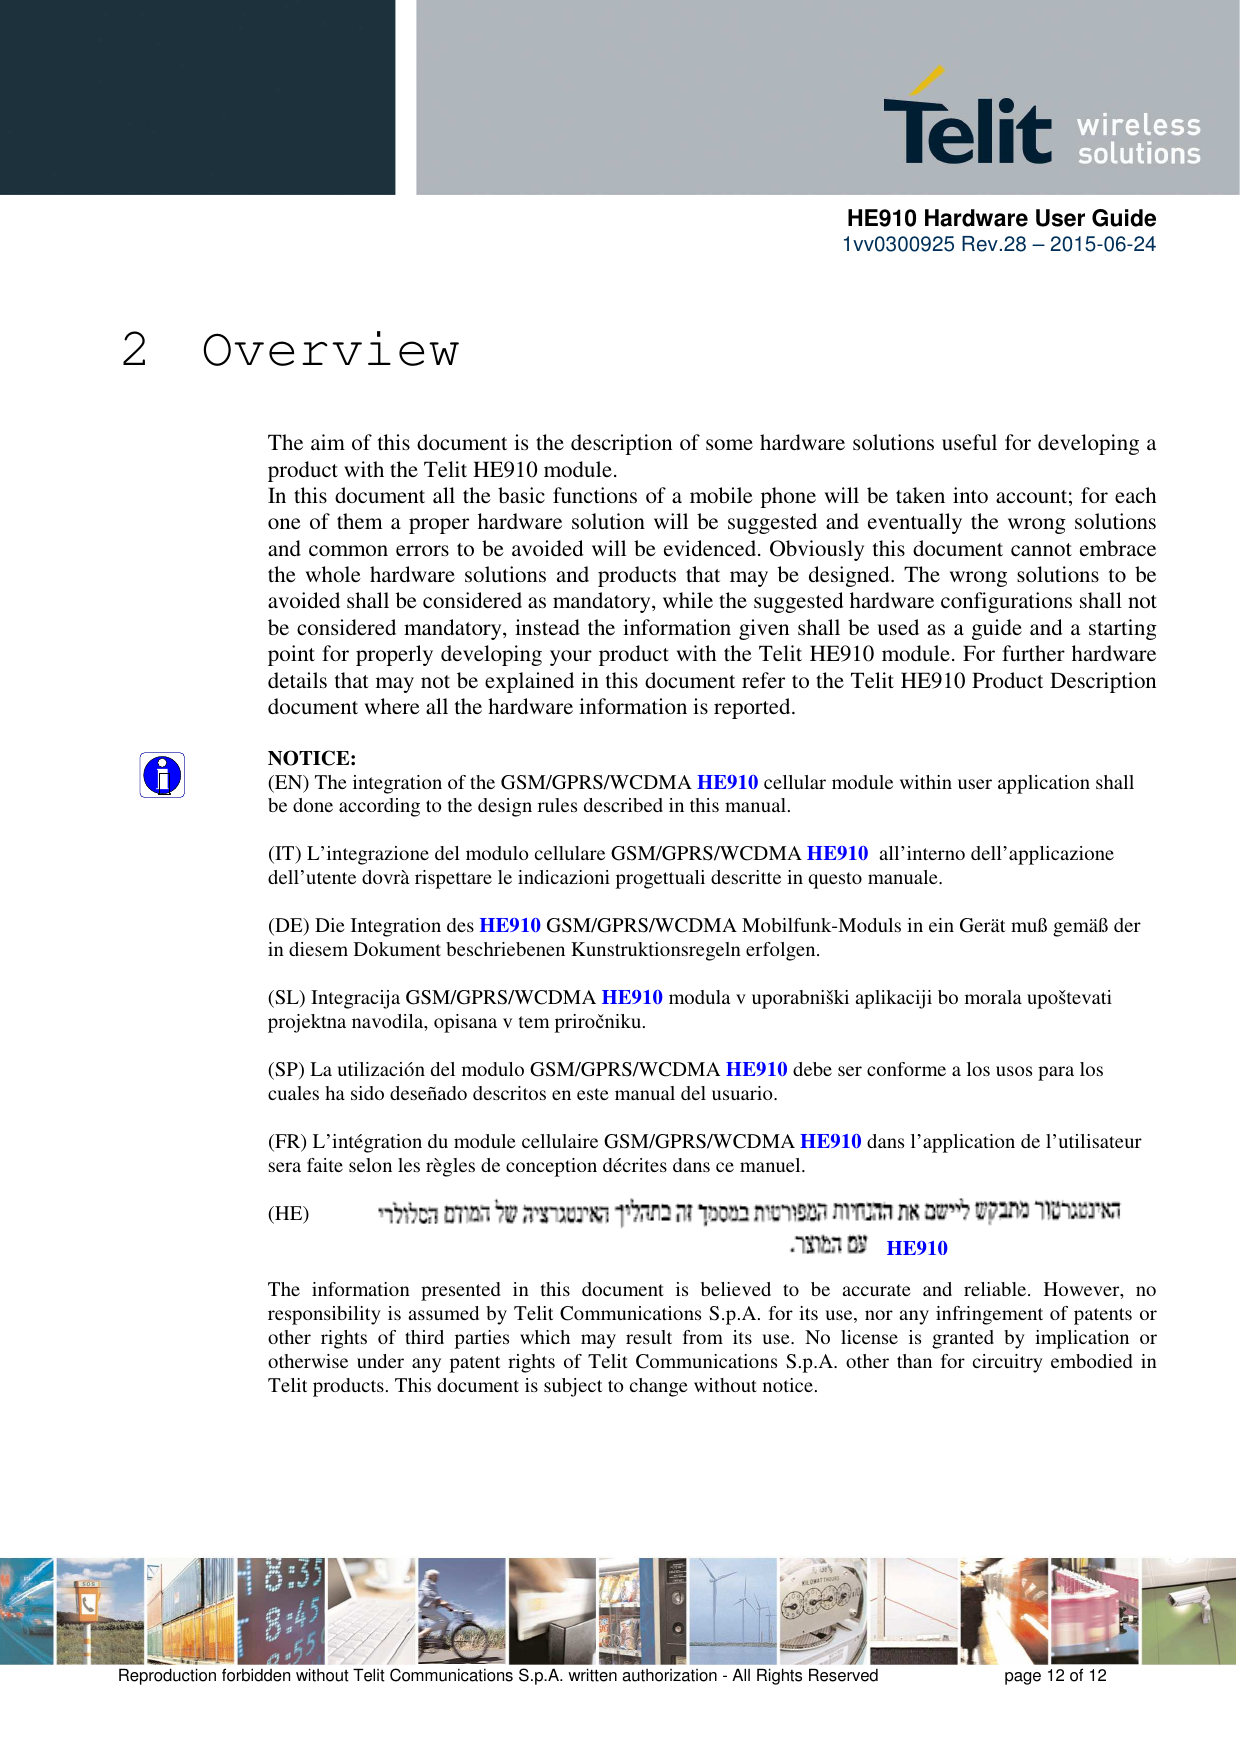      HE910 Hardware User Guide 1vv0300925 Rev.28 – 2015-06-24    Reproduction forbidden without Telit Communications S.p.A. written authorization - All Rights Reserved    page 12 of 12   2 Overview The aim of this document is the description of some hardware solutions useful for developing a product with the Telit HE910 module. In this document all the basic functions of a mobile phone will be taken into account; for each one of them a proper hardware solution will be suggested and eventually the wrong solutions and common errors to be avoided will be evidenced. Obviously this document cannot embrace the whole hardware solutions  and products that may be  designed. The wrong solutions to  be avoided shall be considered as mandatory, while the suggested hardware configurations shall not be considered mandatory, instead the information given shall be used as a guide and a starting point for properly developing your product with the Telit HE910 module. For further hardware details that may not be explained in this document refer to the Telit HE910 Product Description document where all the hardware information is reported.  NOTICE: (EN) The integration of the GSM/GPRS/WCDMA HE910 cellular module within user application shall be done according to the design rules described in this manual.  (IT) L’integrazione del modulo cellulare GSM/GPRS/WCDMA HE910  all’interno dell’applicazione dell’utente dovrà rispettare le indicazioni progettuali descritte in questo manuale.  (DE) Die Integration des HE910 GSM/GPRS/WCDMA Mobilfunk-Moduls in ein Gerät muß gemäß der in diesem Dokument beschriebenen Kunstruktionsregeln erfolgen.  (SL) Integracija GSM/GPRS/WCDMA HE910 modula v uporabniški aplikaciji bo morala upoštevati projektna navodila, opisana v tem priročniku.  (SP) La utilización del modulo GSM/GPRS/WCDMA HE910 debe ser conforme a los usos para los cuales ha sido deseñado descritos en este manual del usuario.  (FR) L’intégration du module cellulaire GSM/GPRS/WCDMA HE910 dans l’application de l’utilisateur sera faite selon les règles de conception décrites dans ce manuel.  (HE)   The  information  presented  in  this  document  is  believed  to  be  accurate  and  reliable.  However,  no responsibility is assumed by Telit Communications S.p.A. for its use, nor any infringement of patents or other  rights  of  third  parties  which  may  result  from  its  use.  No  license  is  granted  by  implication  or otherwise under any patent rights of Telit Communications S.p.A. other than for circuitry embodied in Telit products. This document is subject to change without notice. HE910 